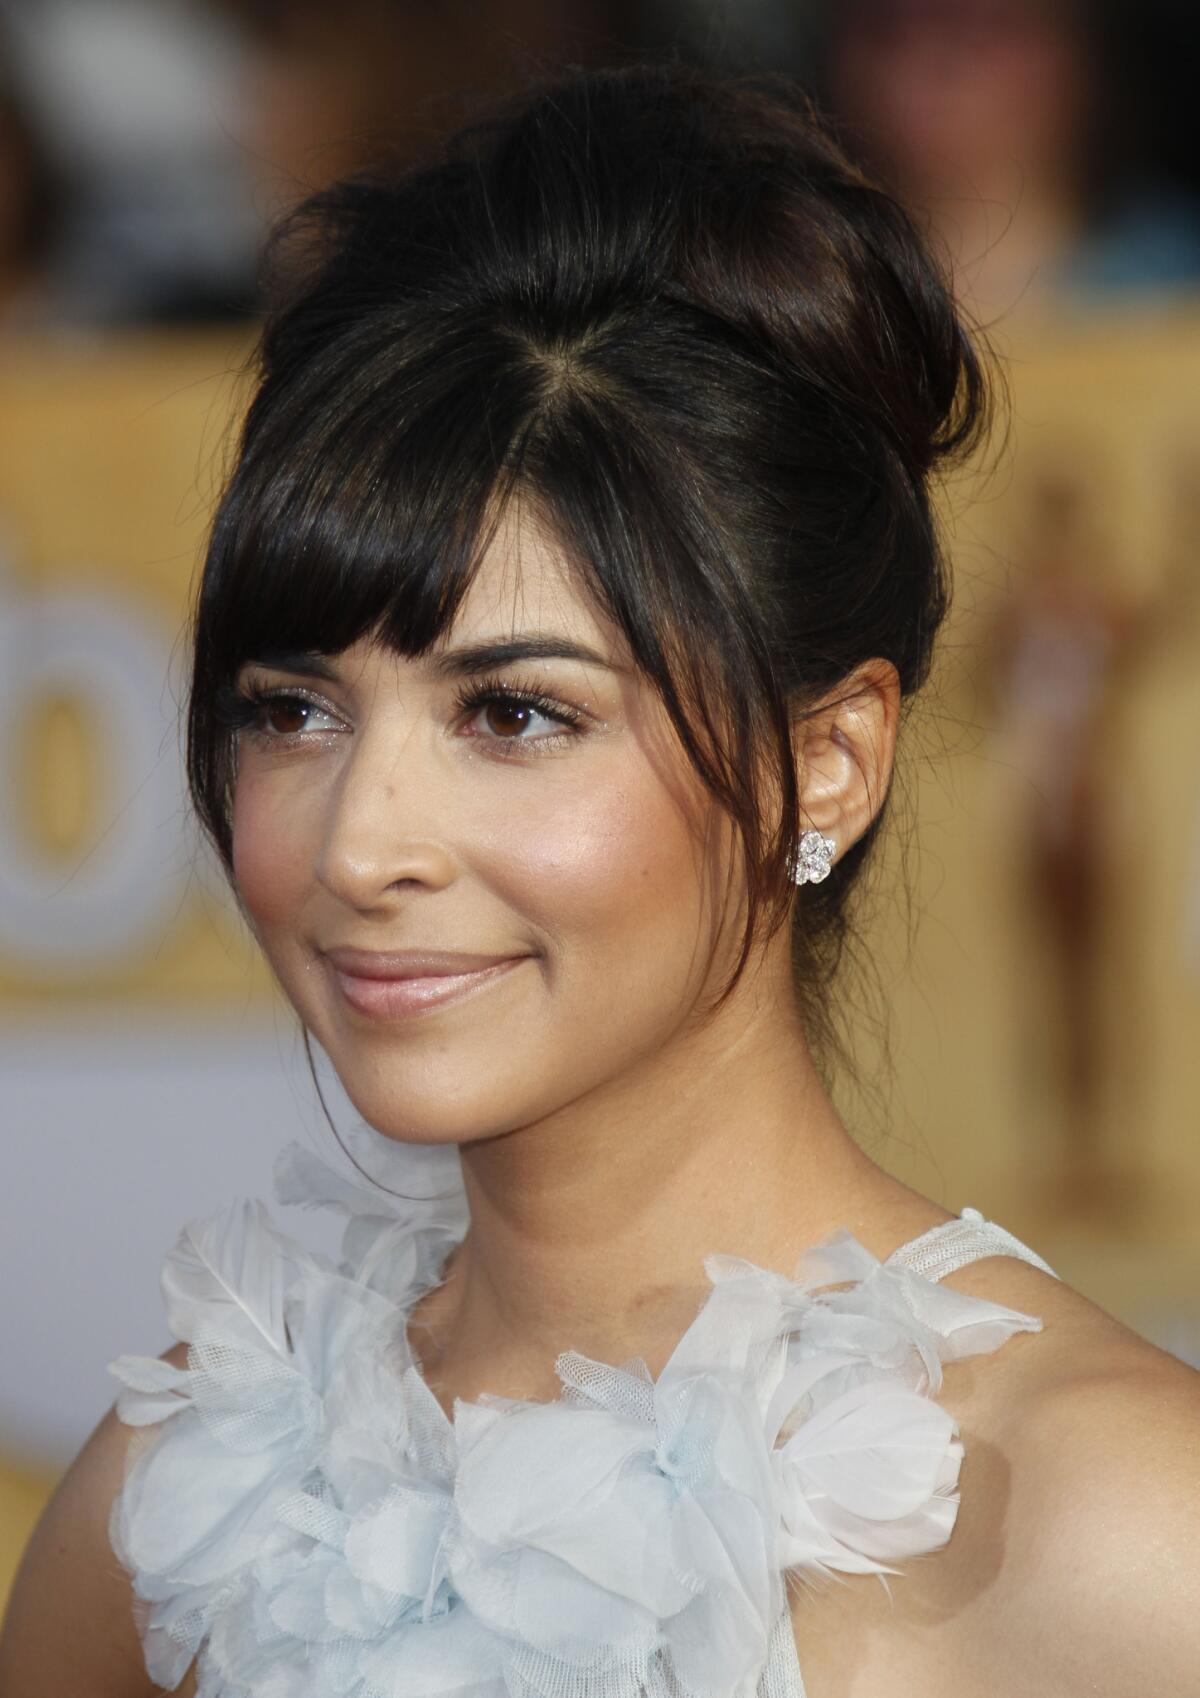 Hannah Simone's glowing look at the Screen Actors Guild Awards was achieved using cosmetics from Target.